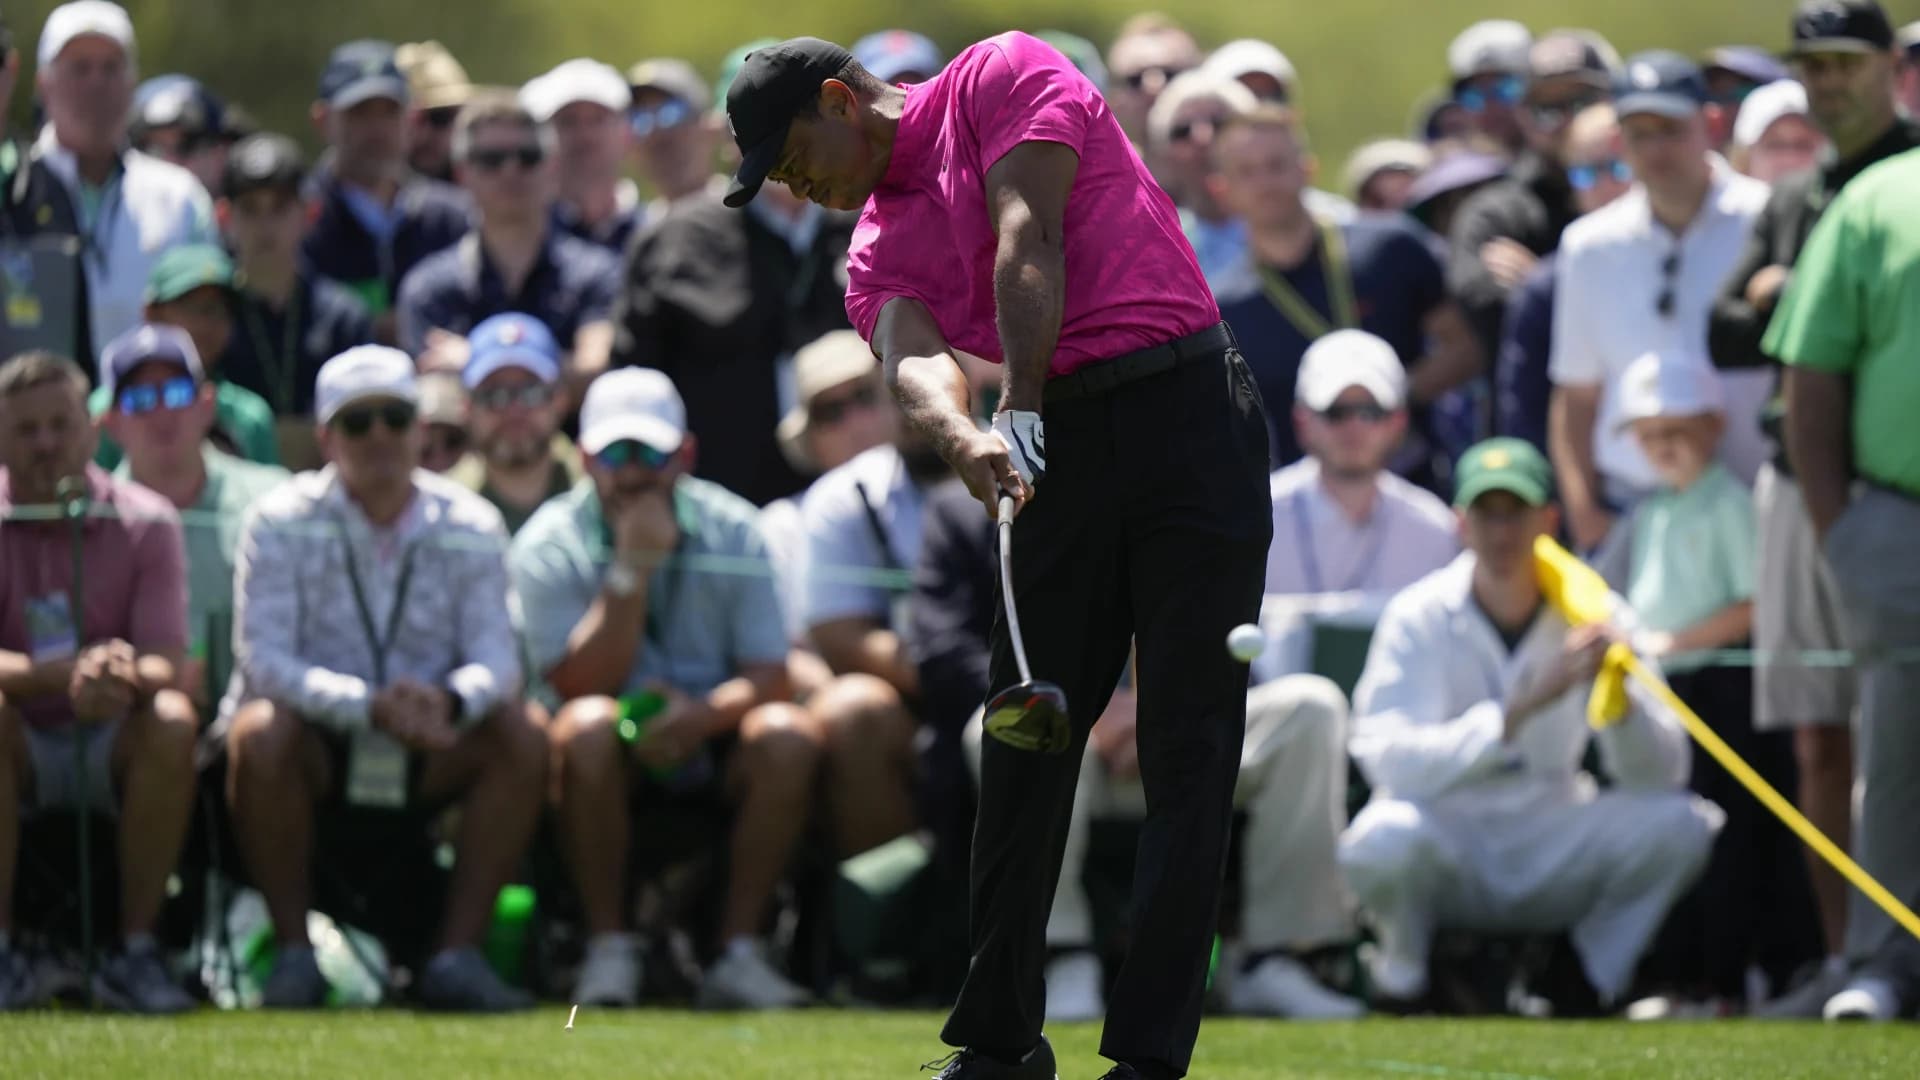 Tiger's back: Woods thrills patrons with Masters comeback